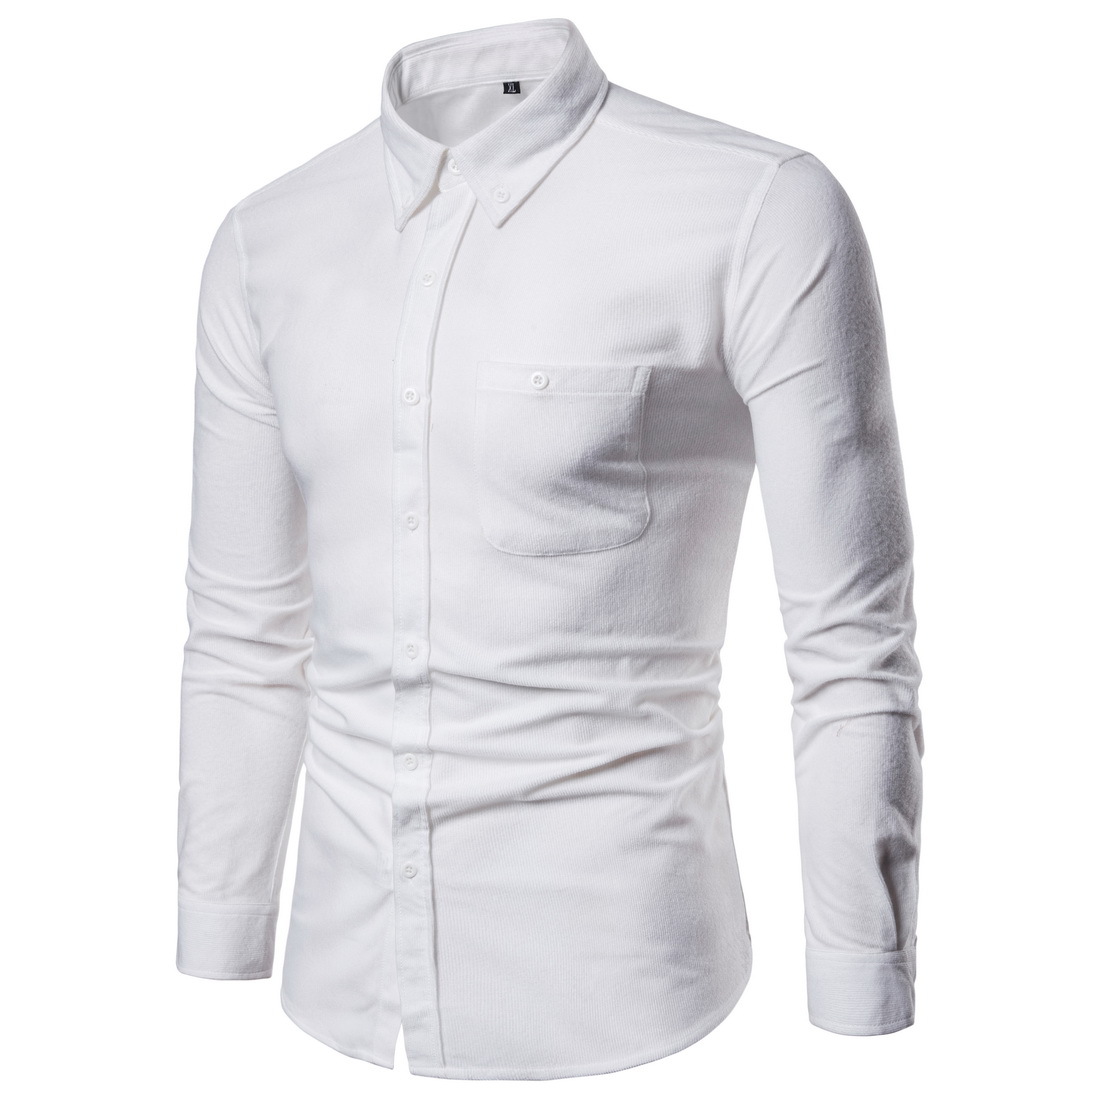 Men Shirt Spring Autumn Corduroy Long Sleeve Single Breasted Casual Slim Fit Plus Size Shirt off white